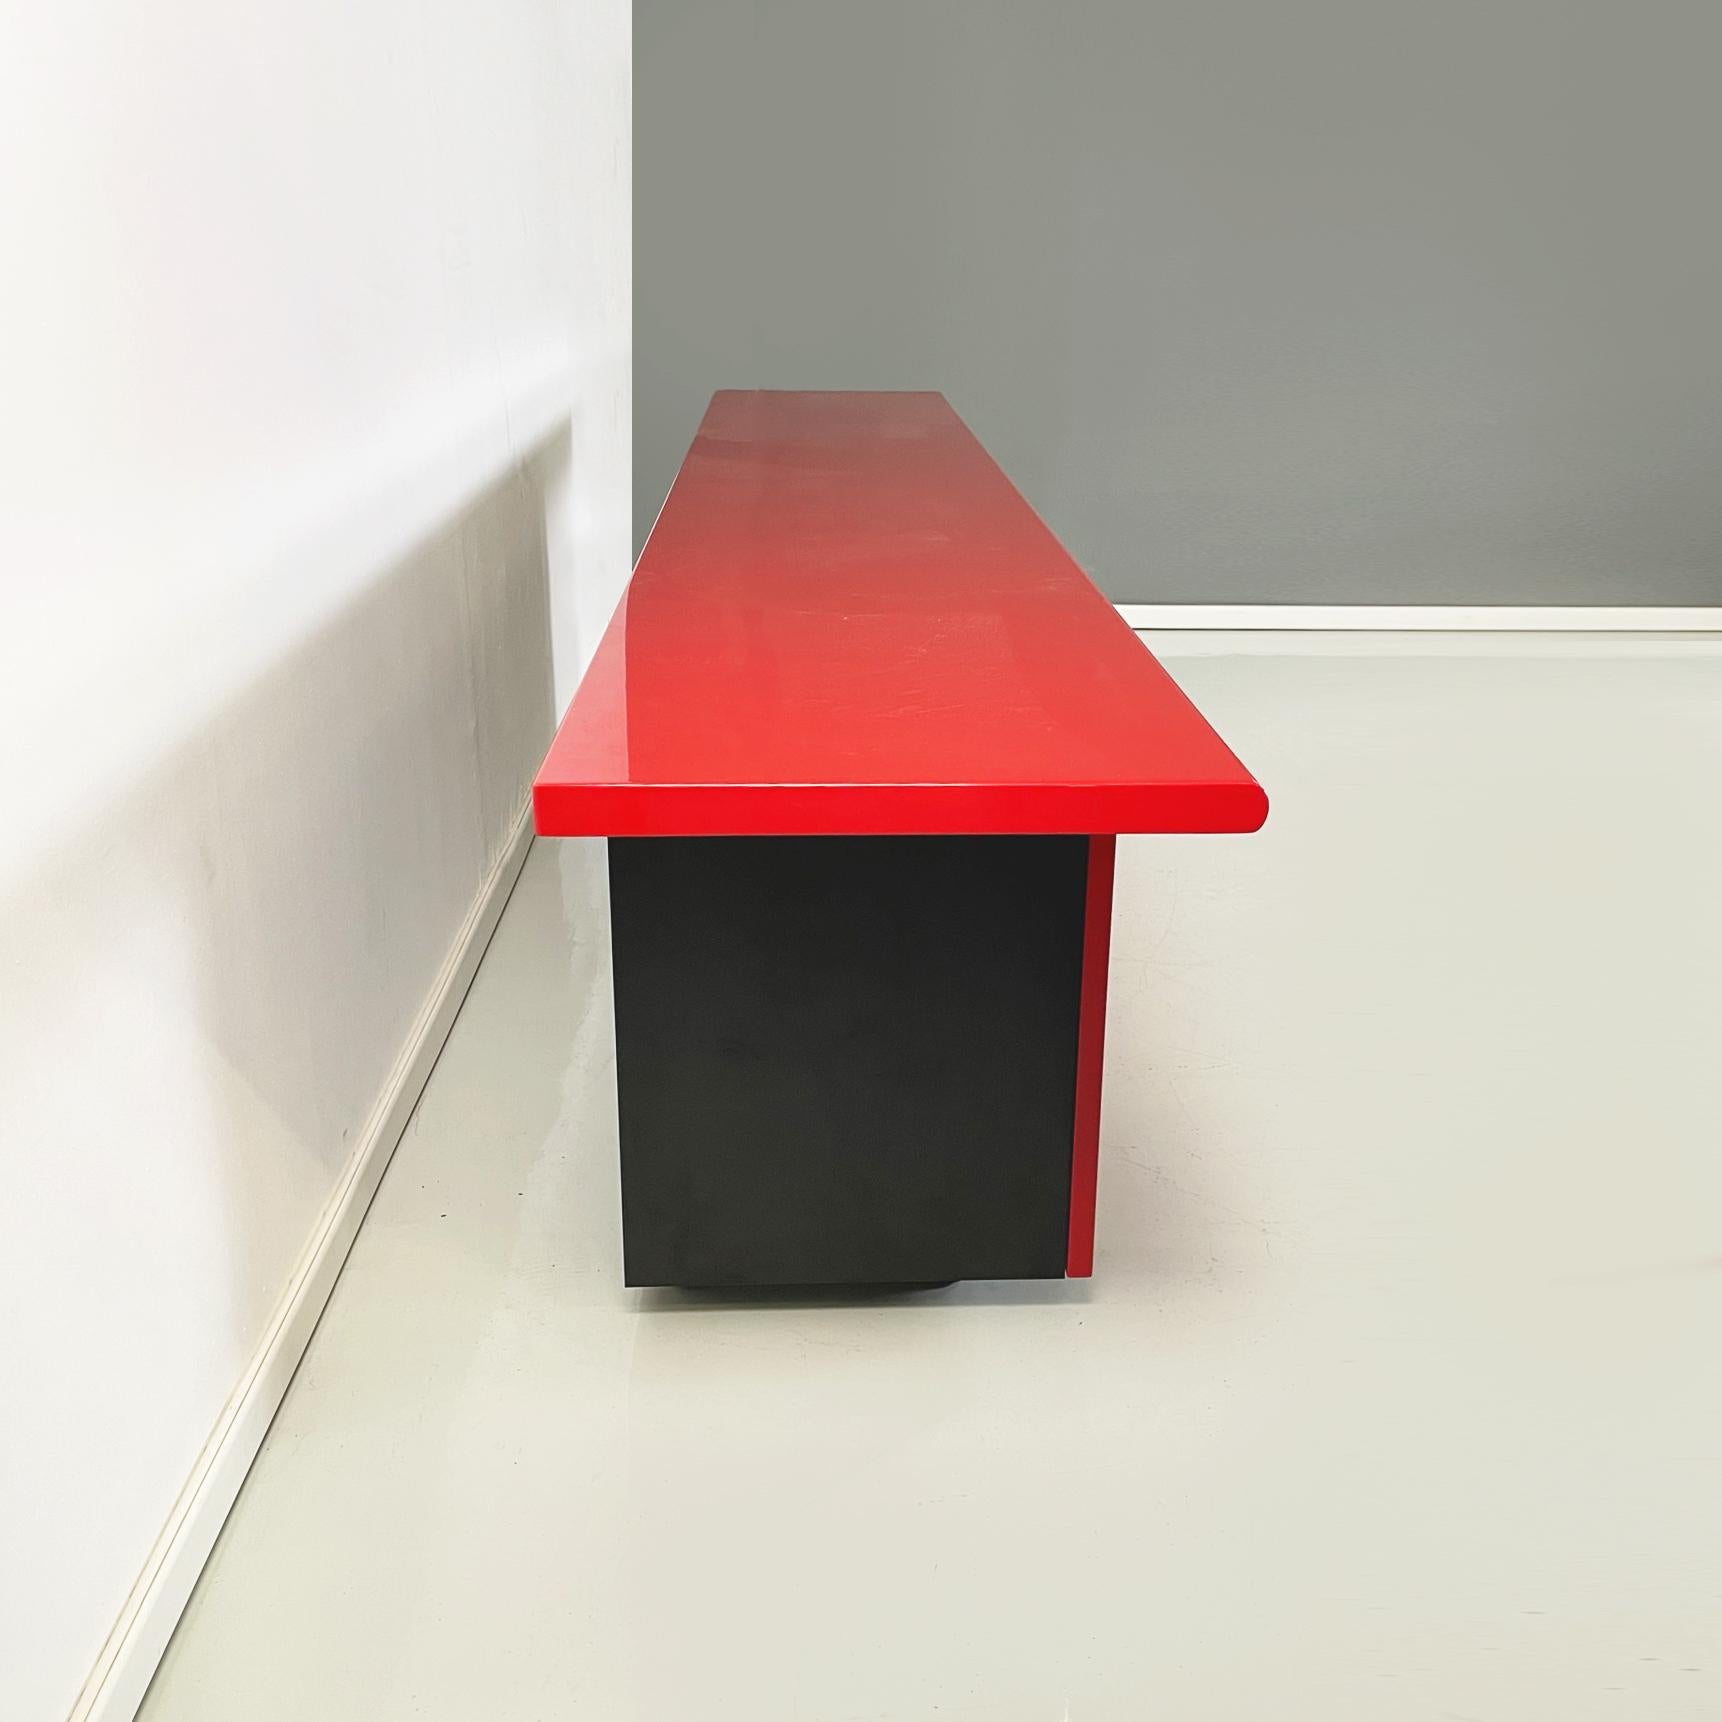 Italian Modern Red Sideboard Sheraton by Stoppino and Acerbis for Acerbis, 1977 For Sale 1